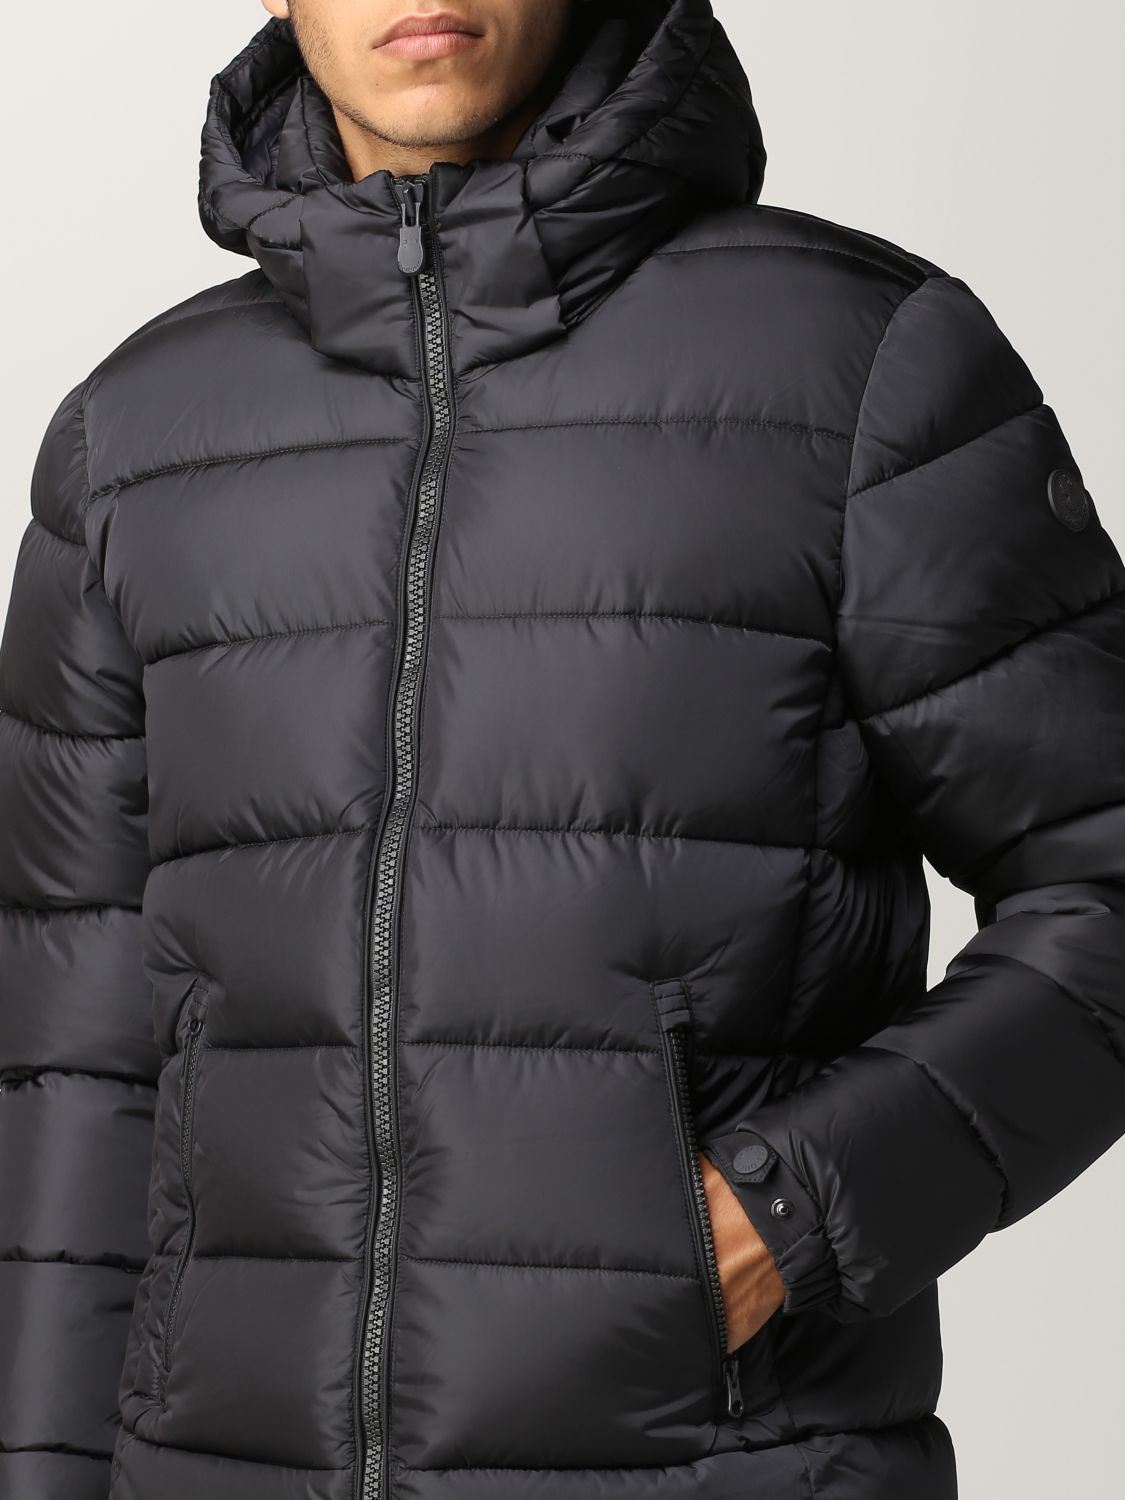 Jacket Save The Duck: Save The Duck jacket for man charcoal 4